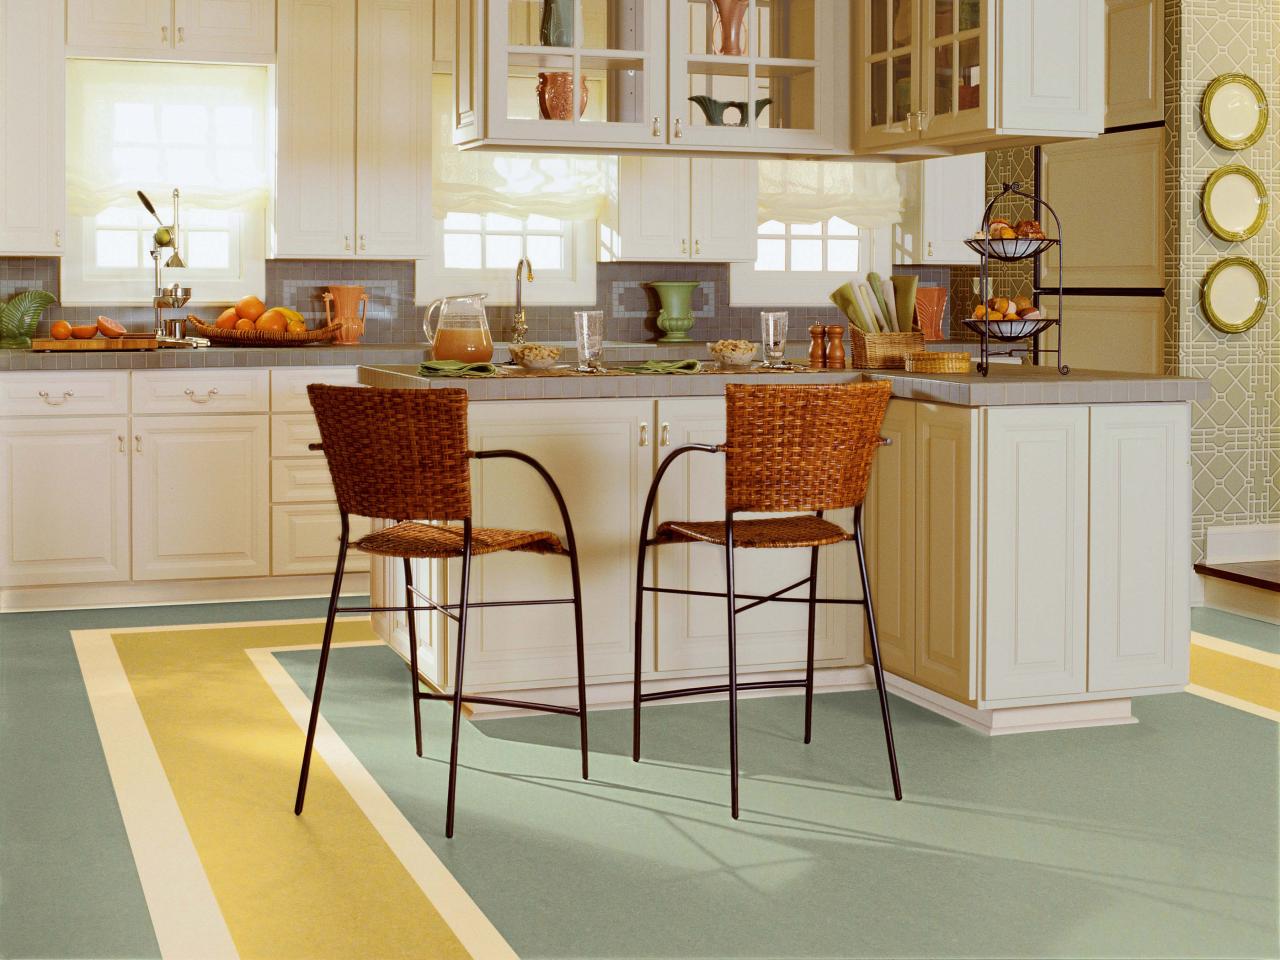 Best Kitchen Flooring Options   Choose the Best Flooring for Your ...